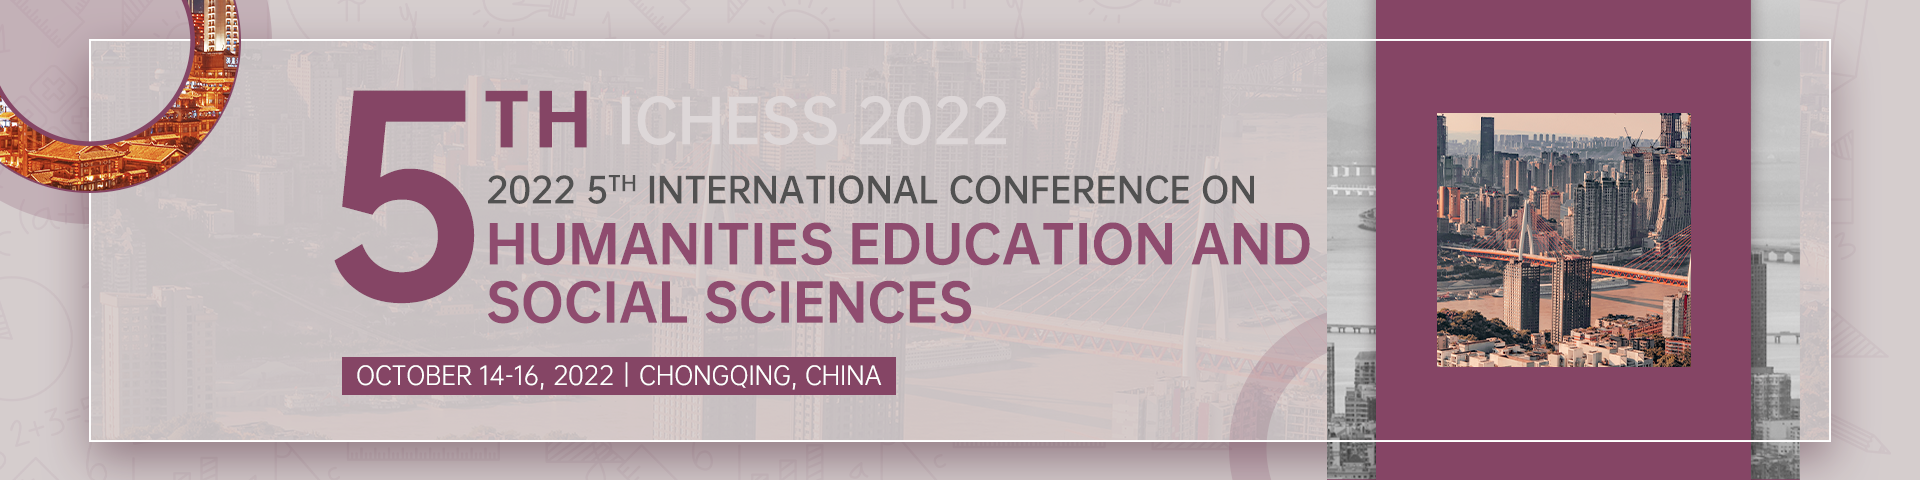 2022 5th International Conference on Humanities Education and Social Sciences (ICHESS 2022), Online Event